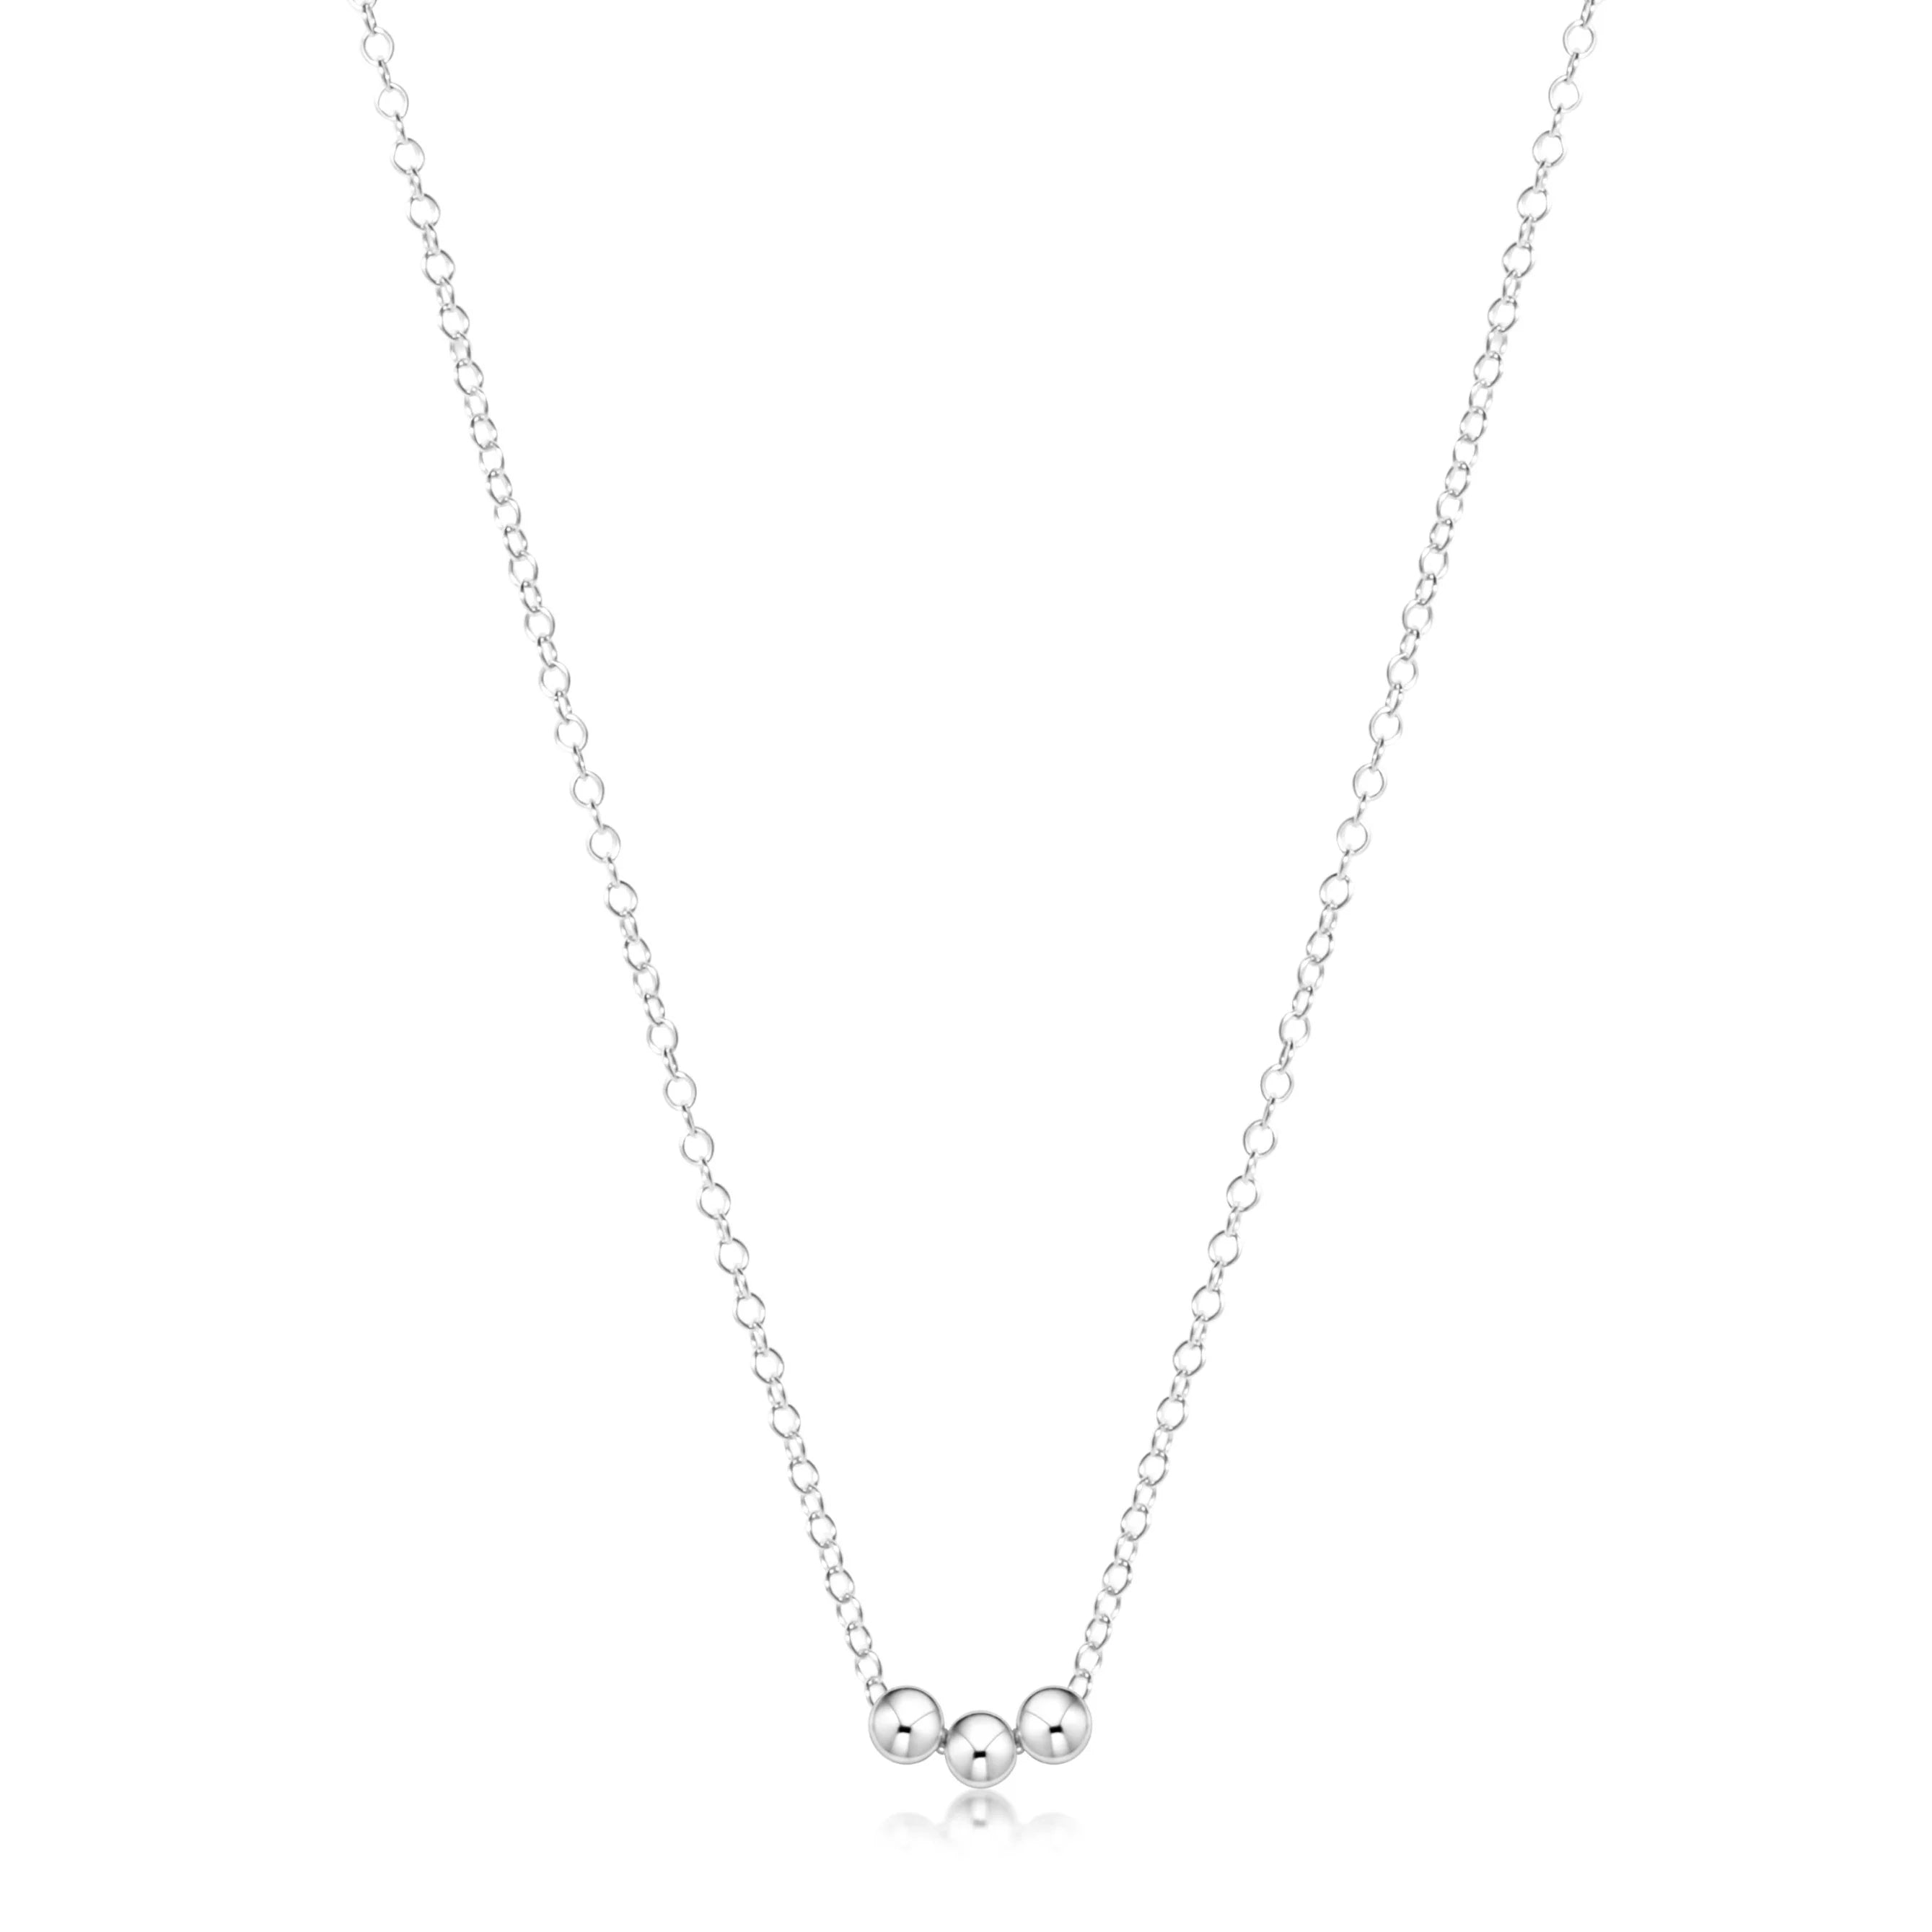 Three Sterling Silver Beads on Silver Chain Necklace